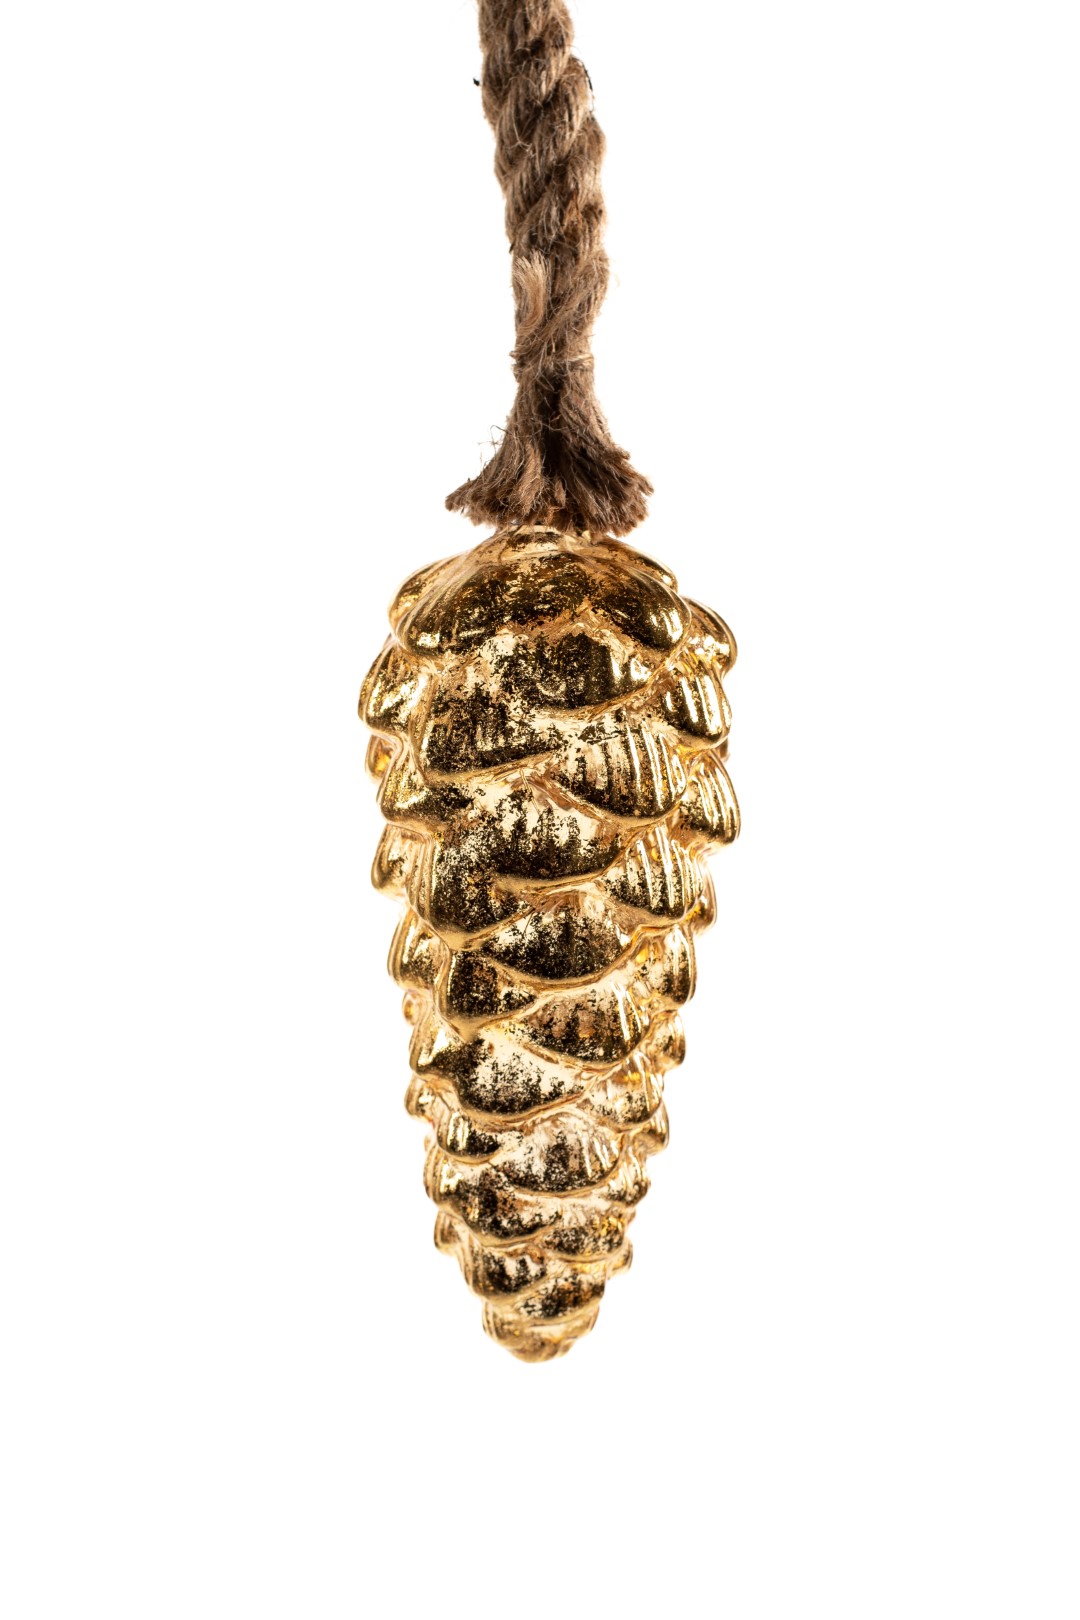 Glass Pinecone Gold Foil 20X9Cm On 100Cm Thick Rope Han - Anna's Collection